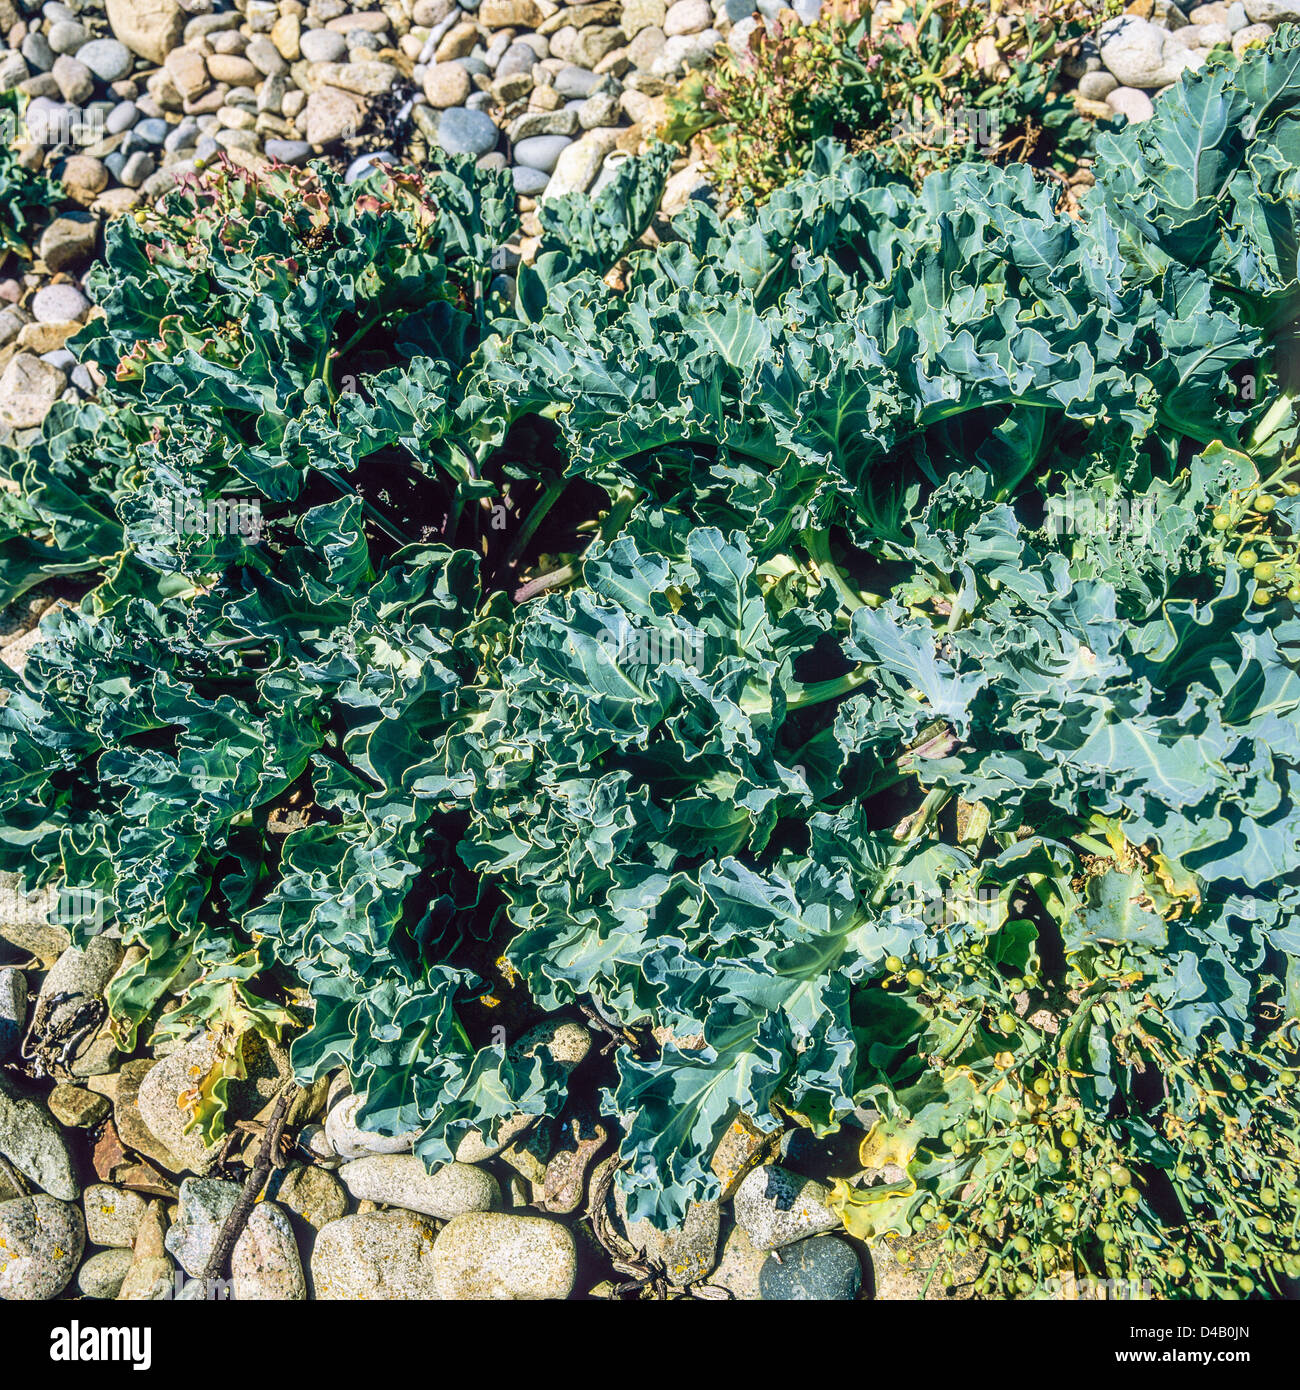 Sea kale, wild cabbage growing on beach, Côtes d'Armor, Brittany, France,  Europe Stock Photo - Alamy